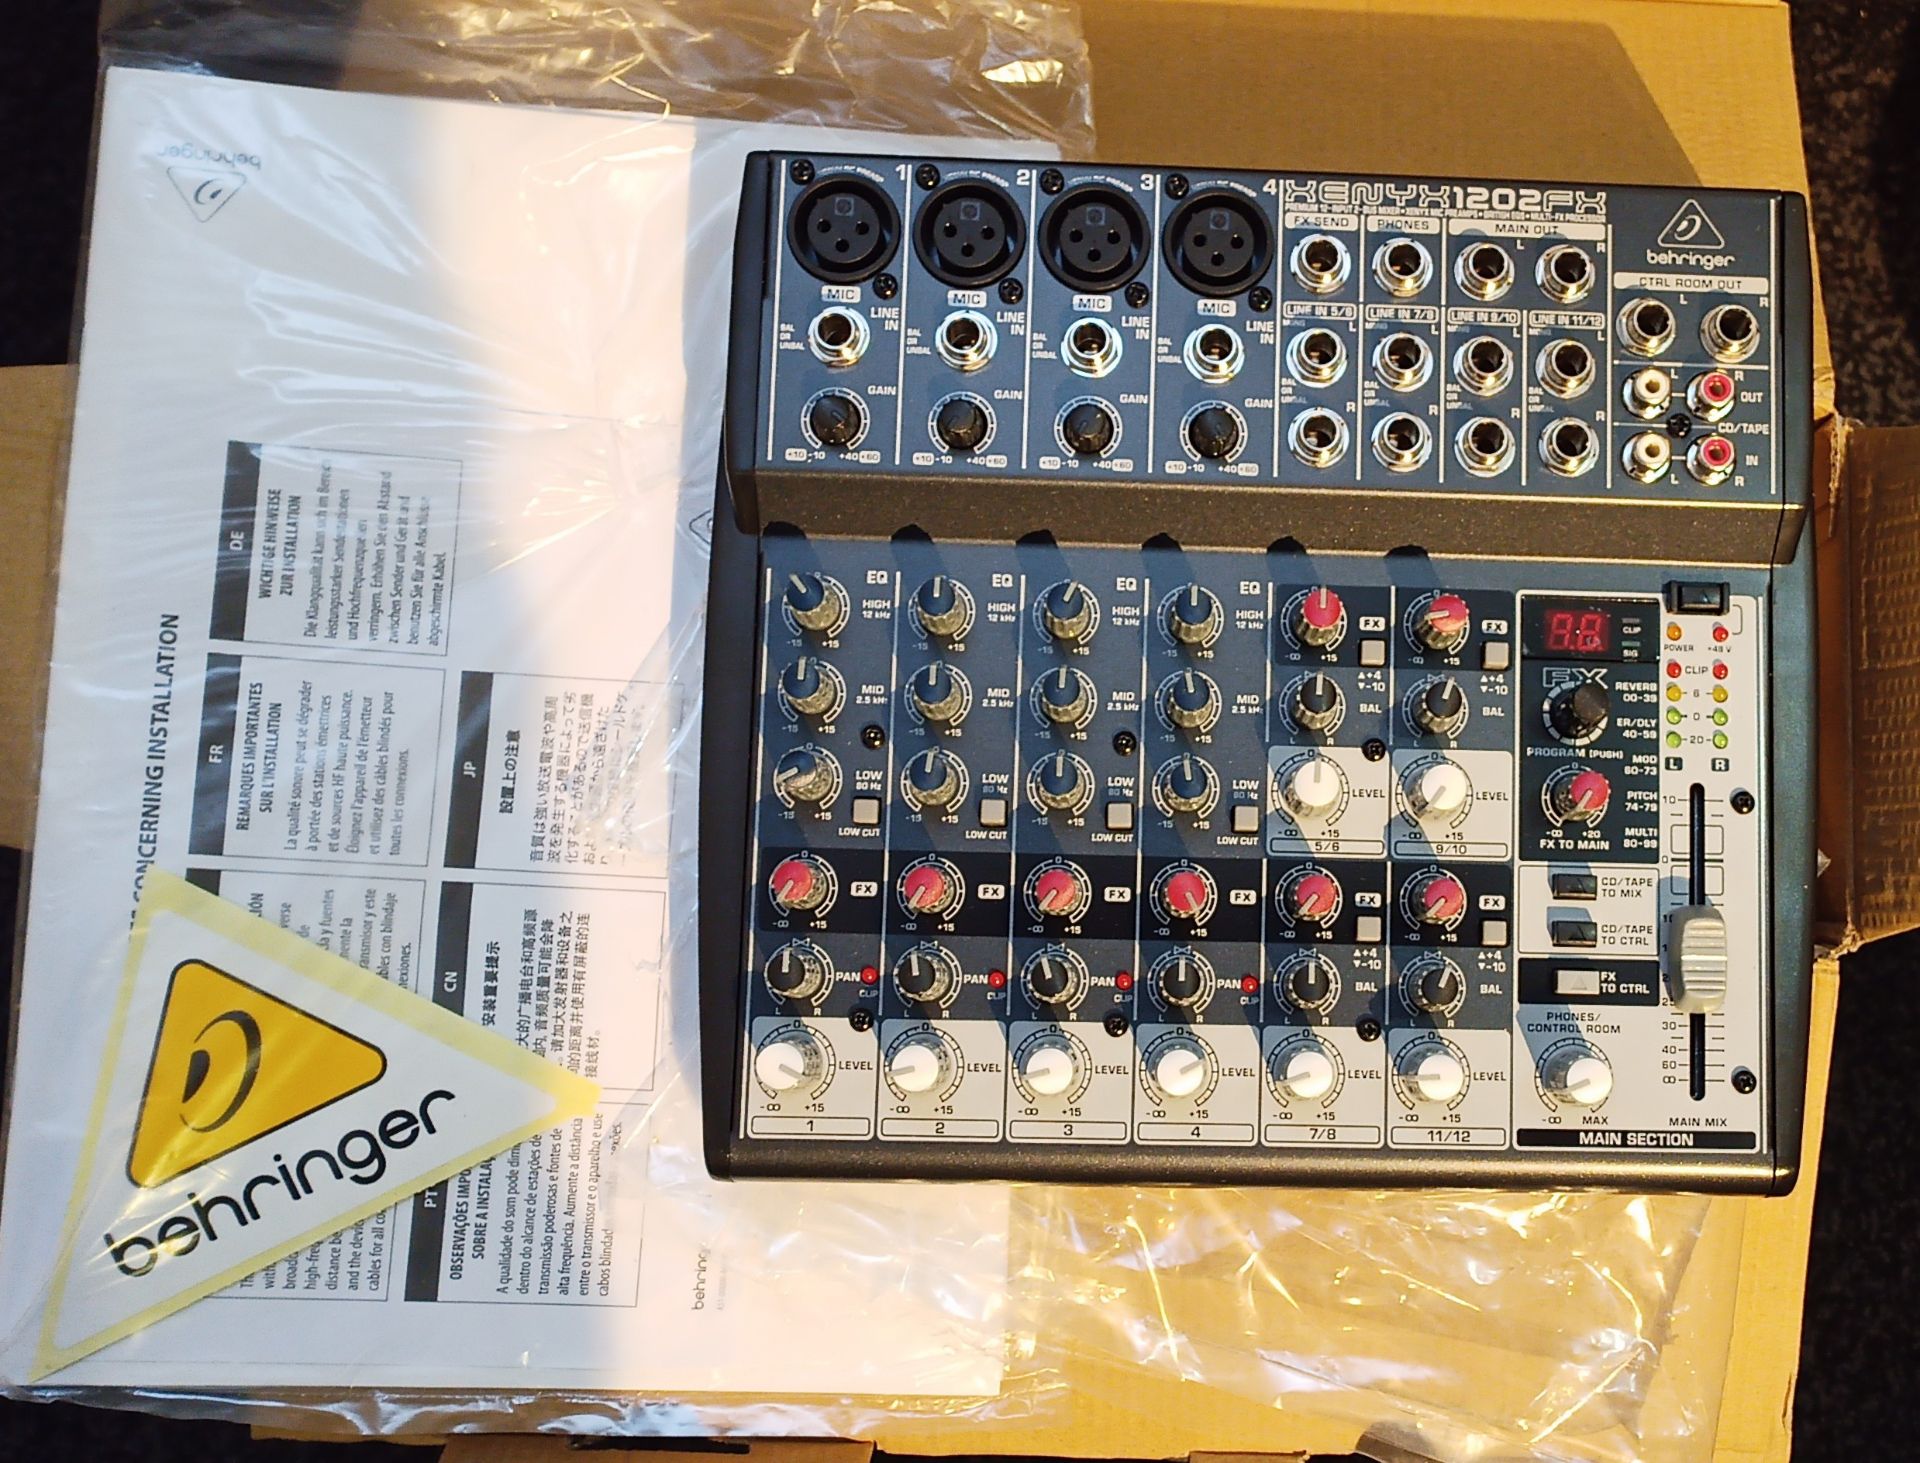 1 x BOXED BEHRINGER XENYX 1202 FX, UNTESTED, RRP £90 *PLUS VAT* - Image 2 of 3